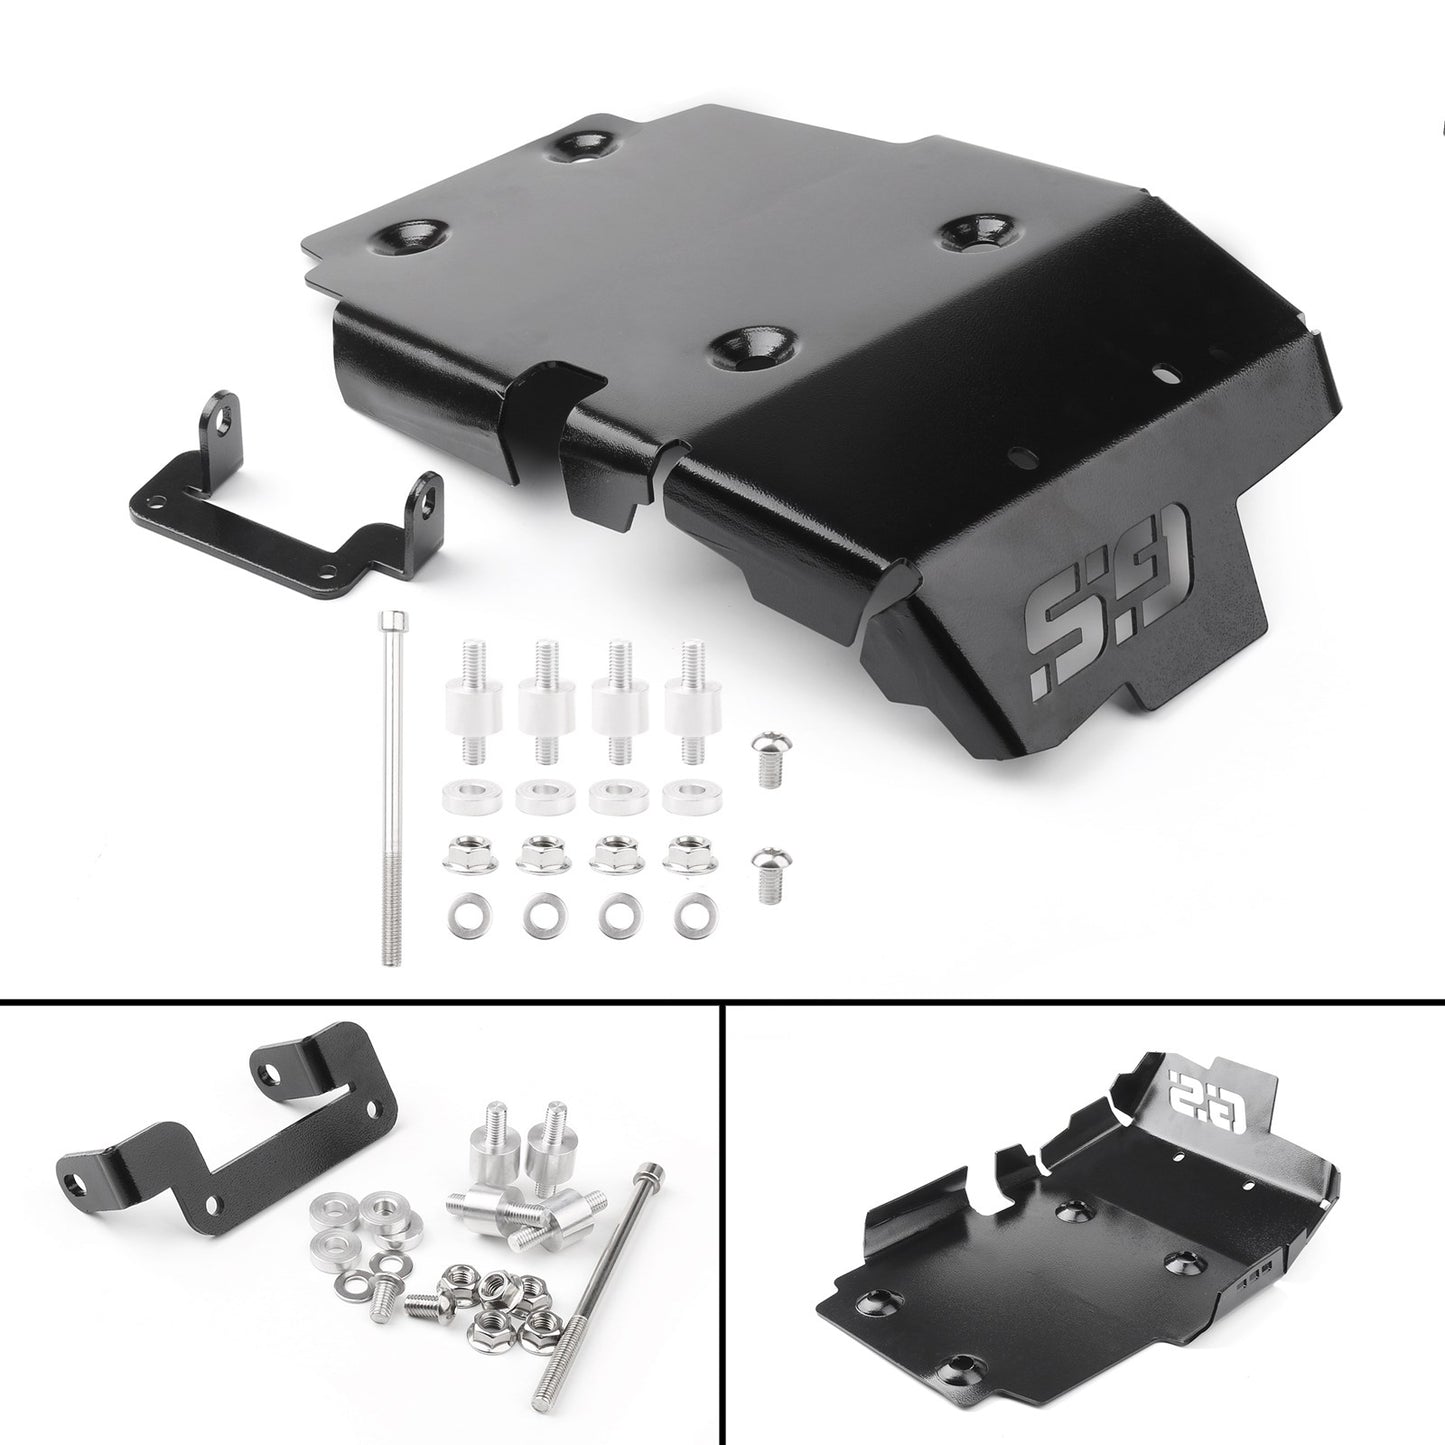 Engine Protector Bash Guard Skid Plate Set For BMW F650 F700 F800 GS 2008-2017